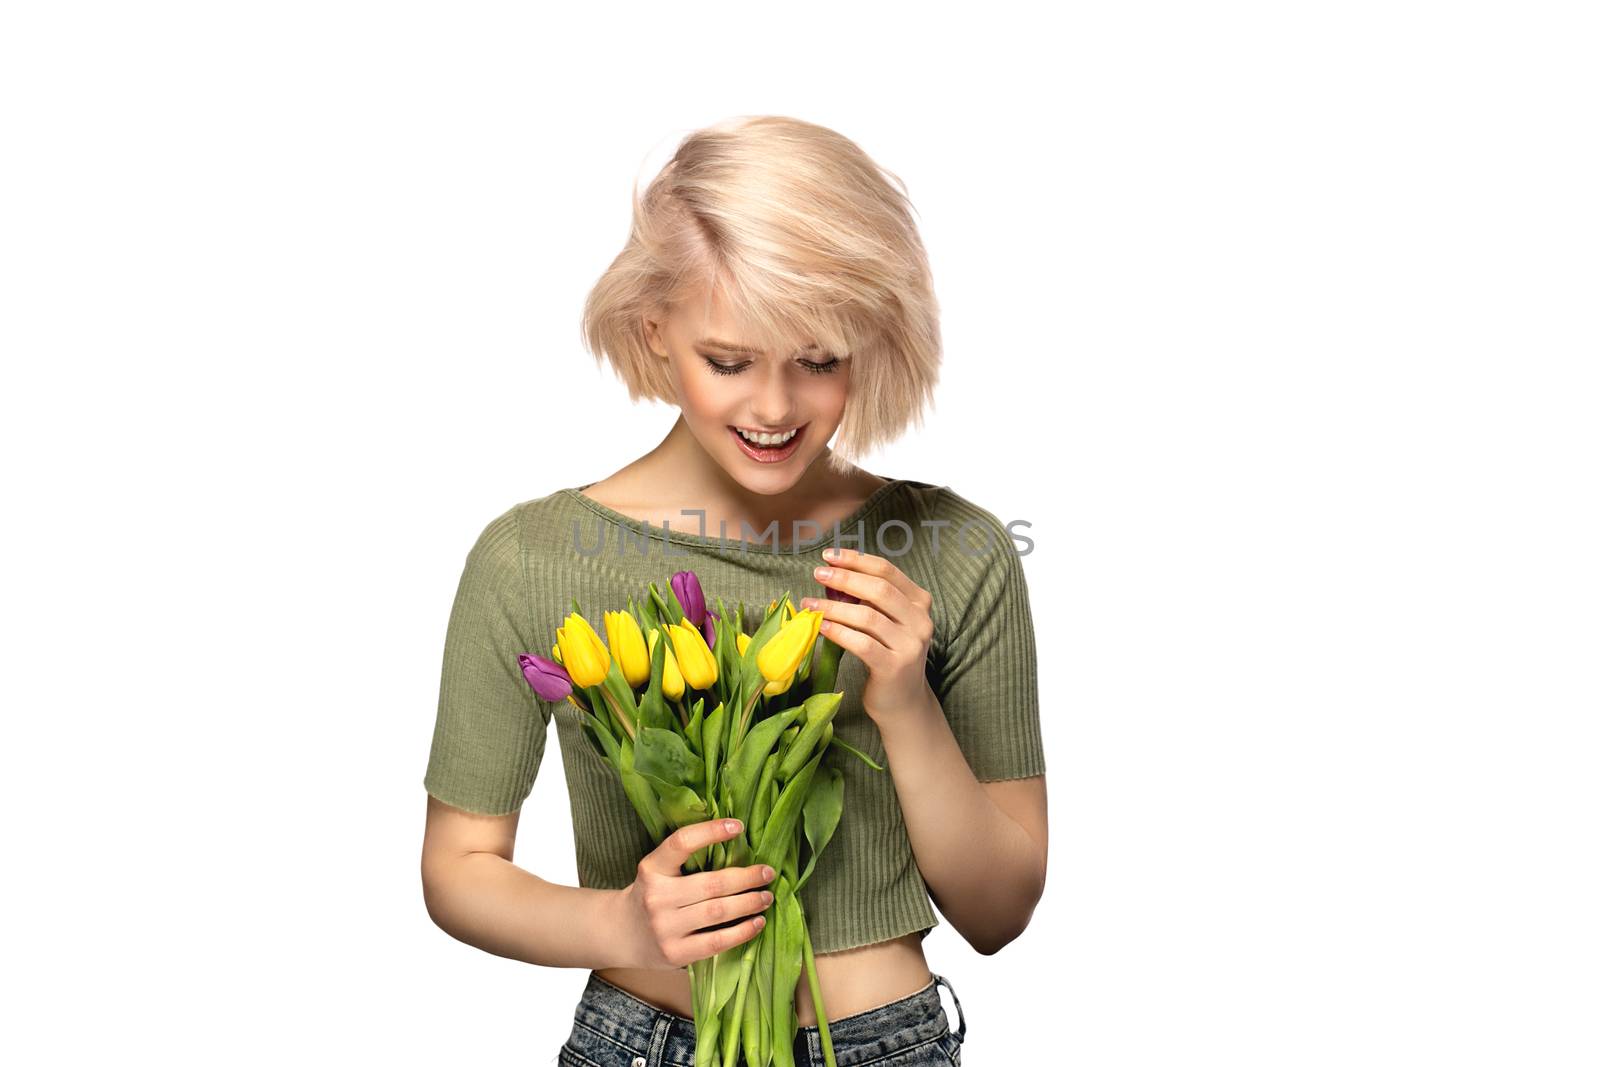 Woman smiling holding bouquet of tulip flowers, studio portrait isolated on white background